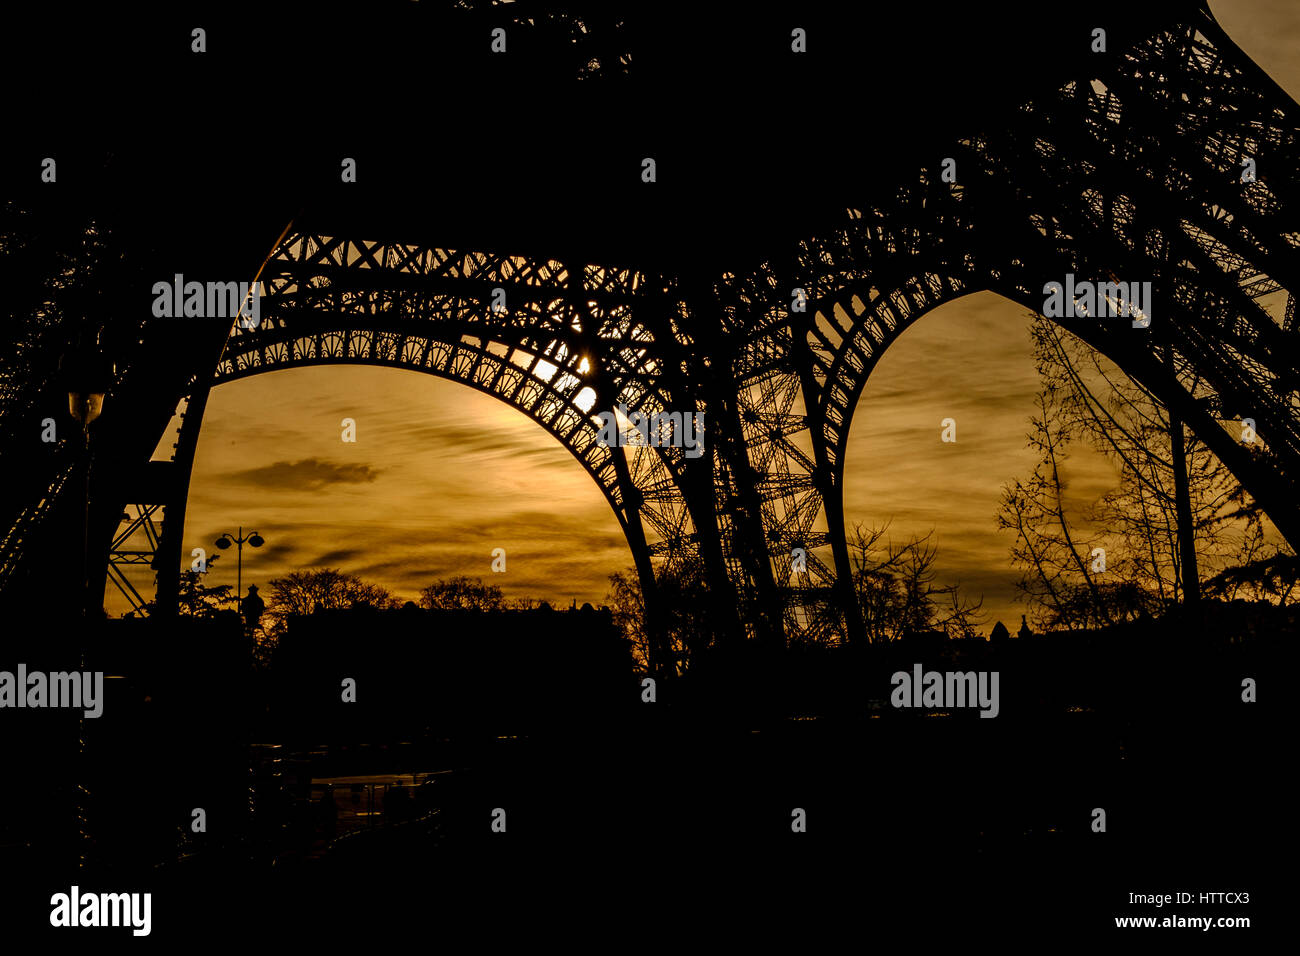 Silhouettes of the base of the Eiffel Tower Stock Photo